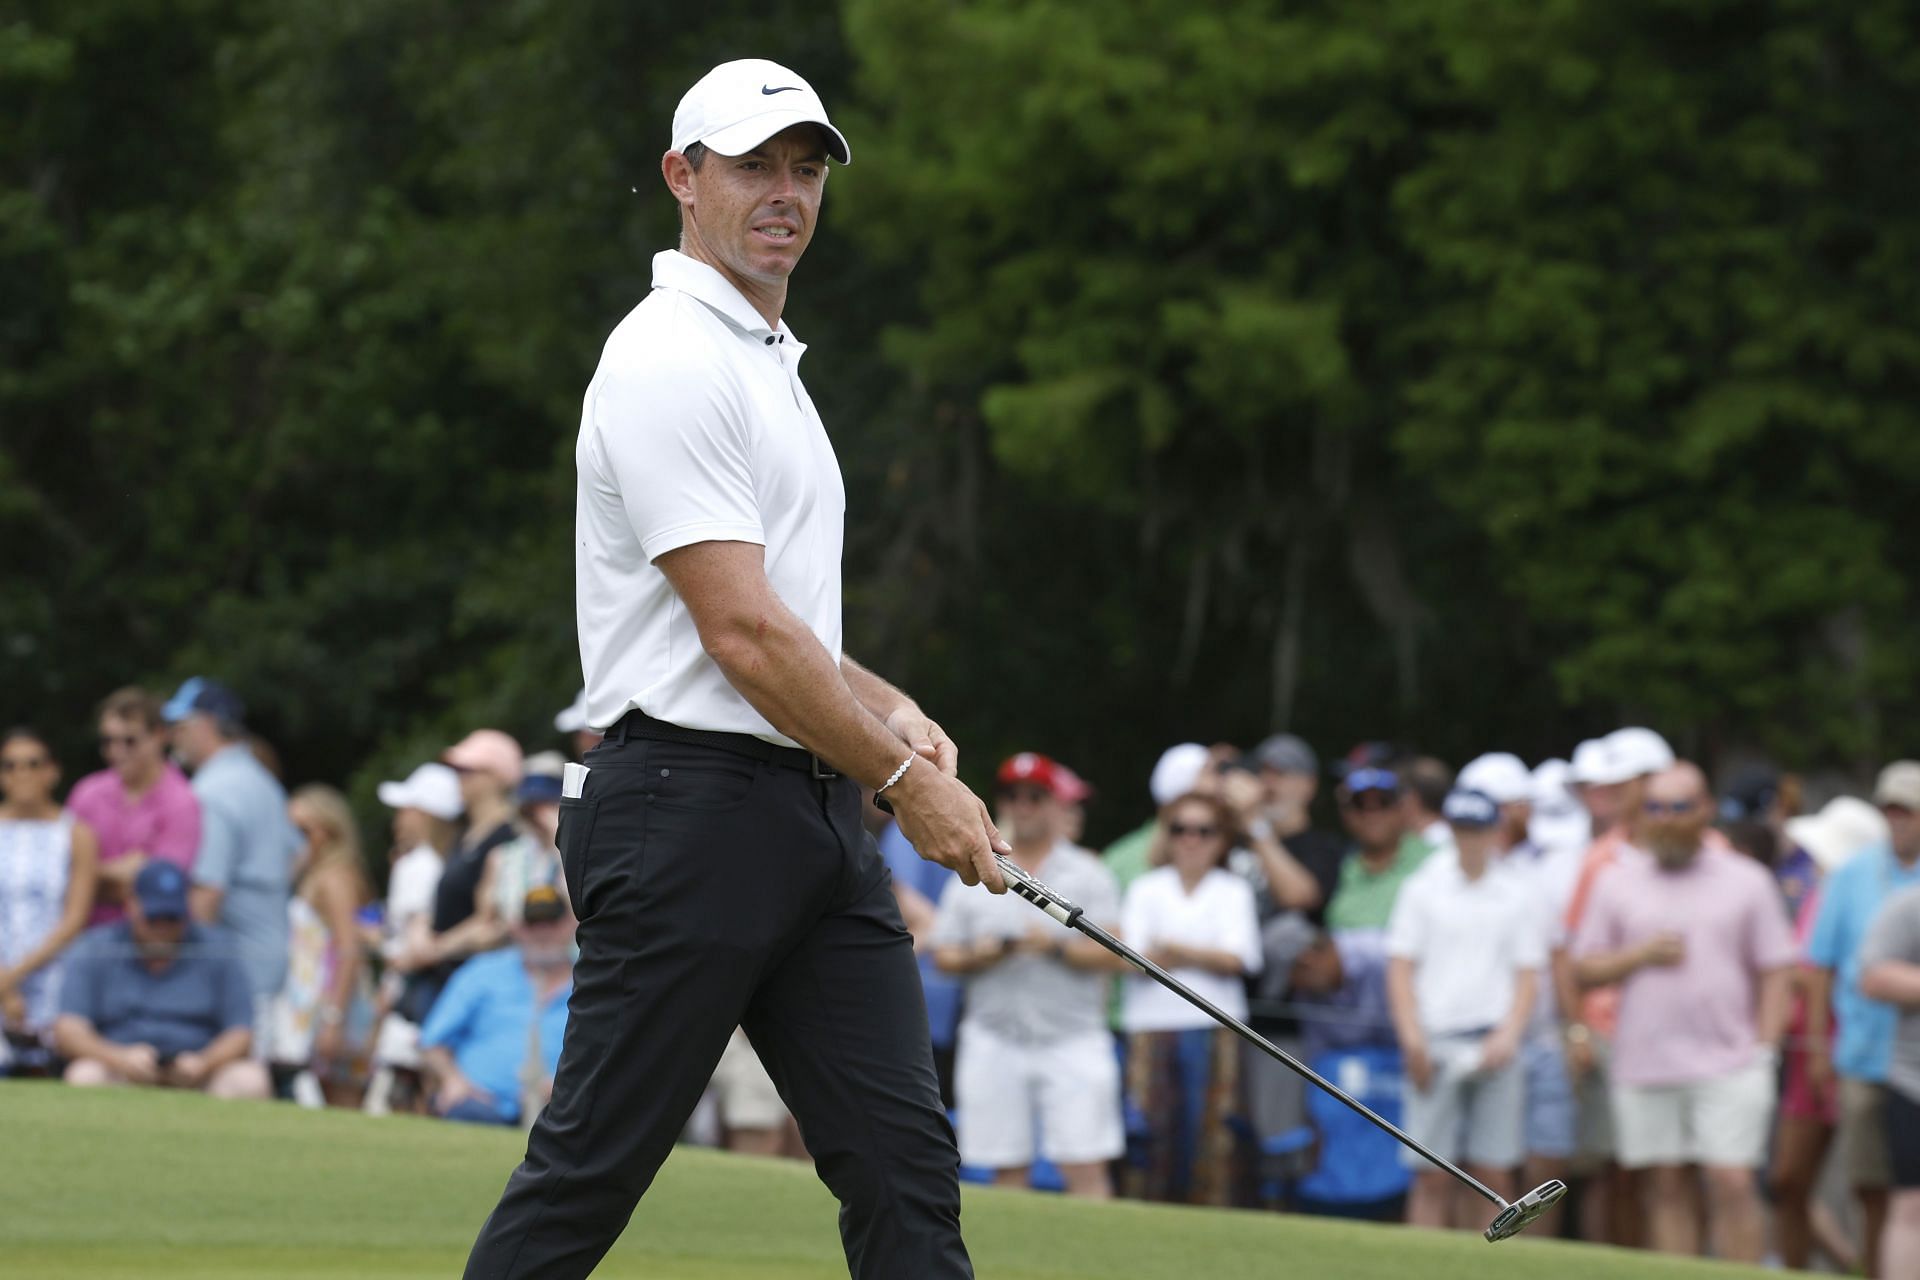 Rory McIlroy is not coming back to the board